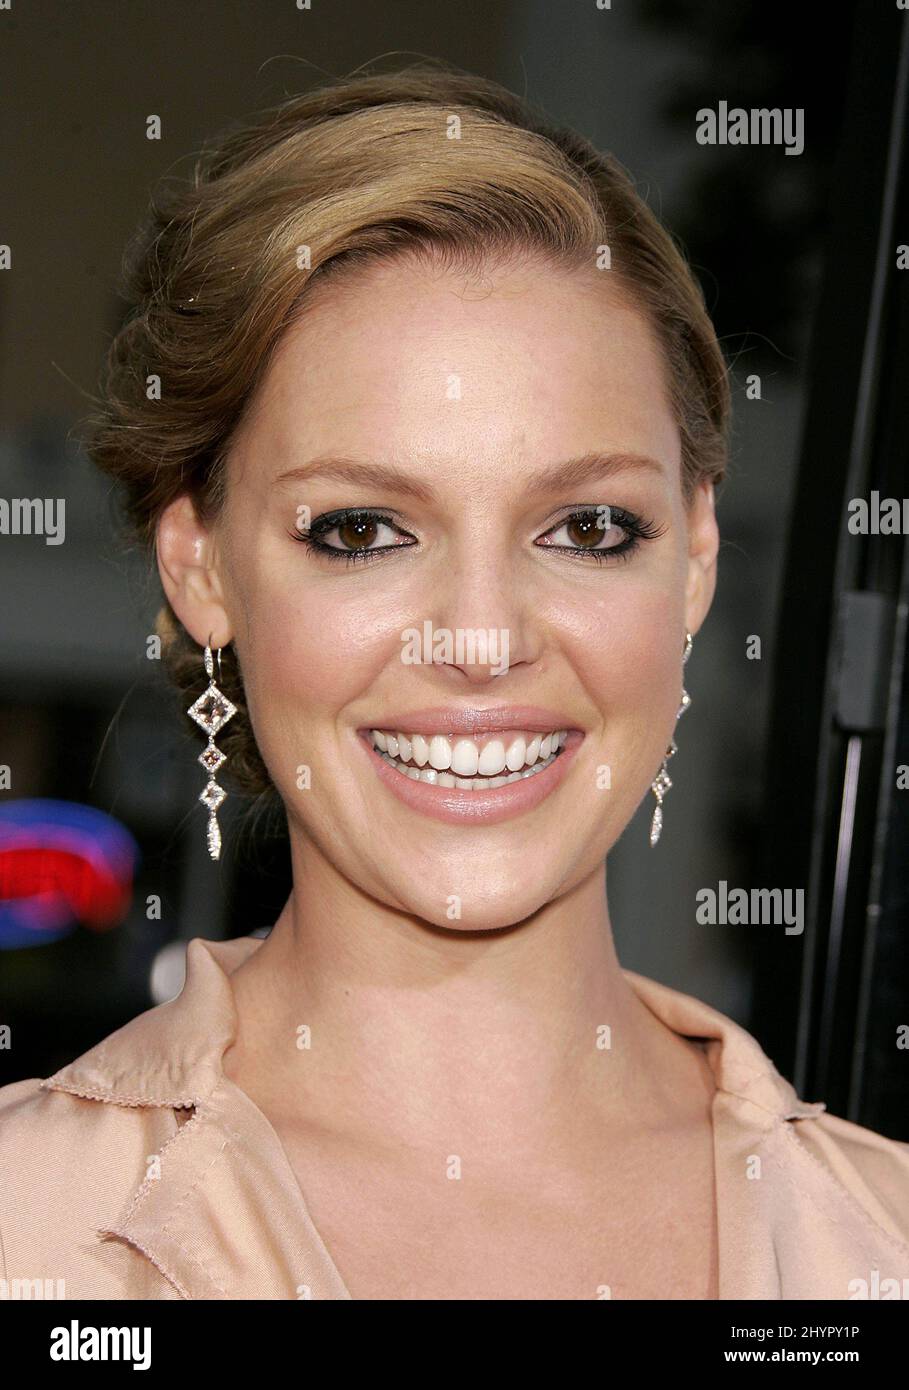 Kathrine Heigl attends the 'Knocked Up' World Premiere held at the Mann ...